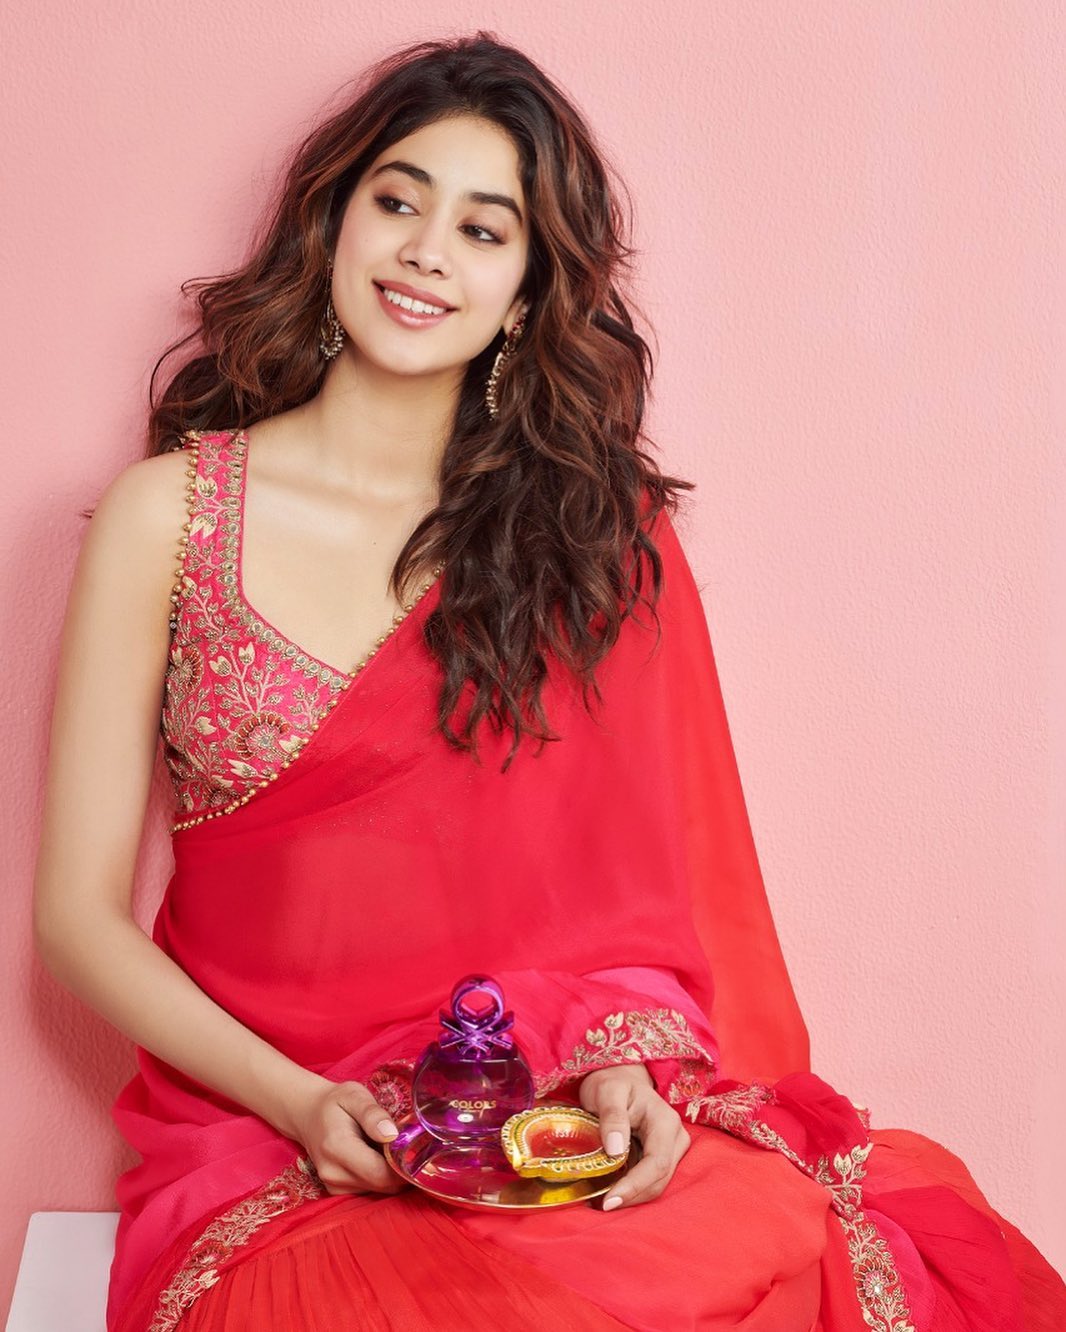 Janhvi Kapoor in red saree hot exposing photoshoot Photos: HD Images